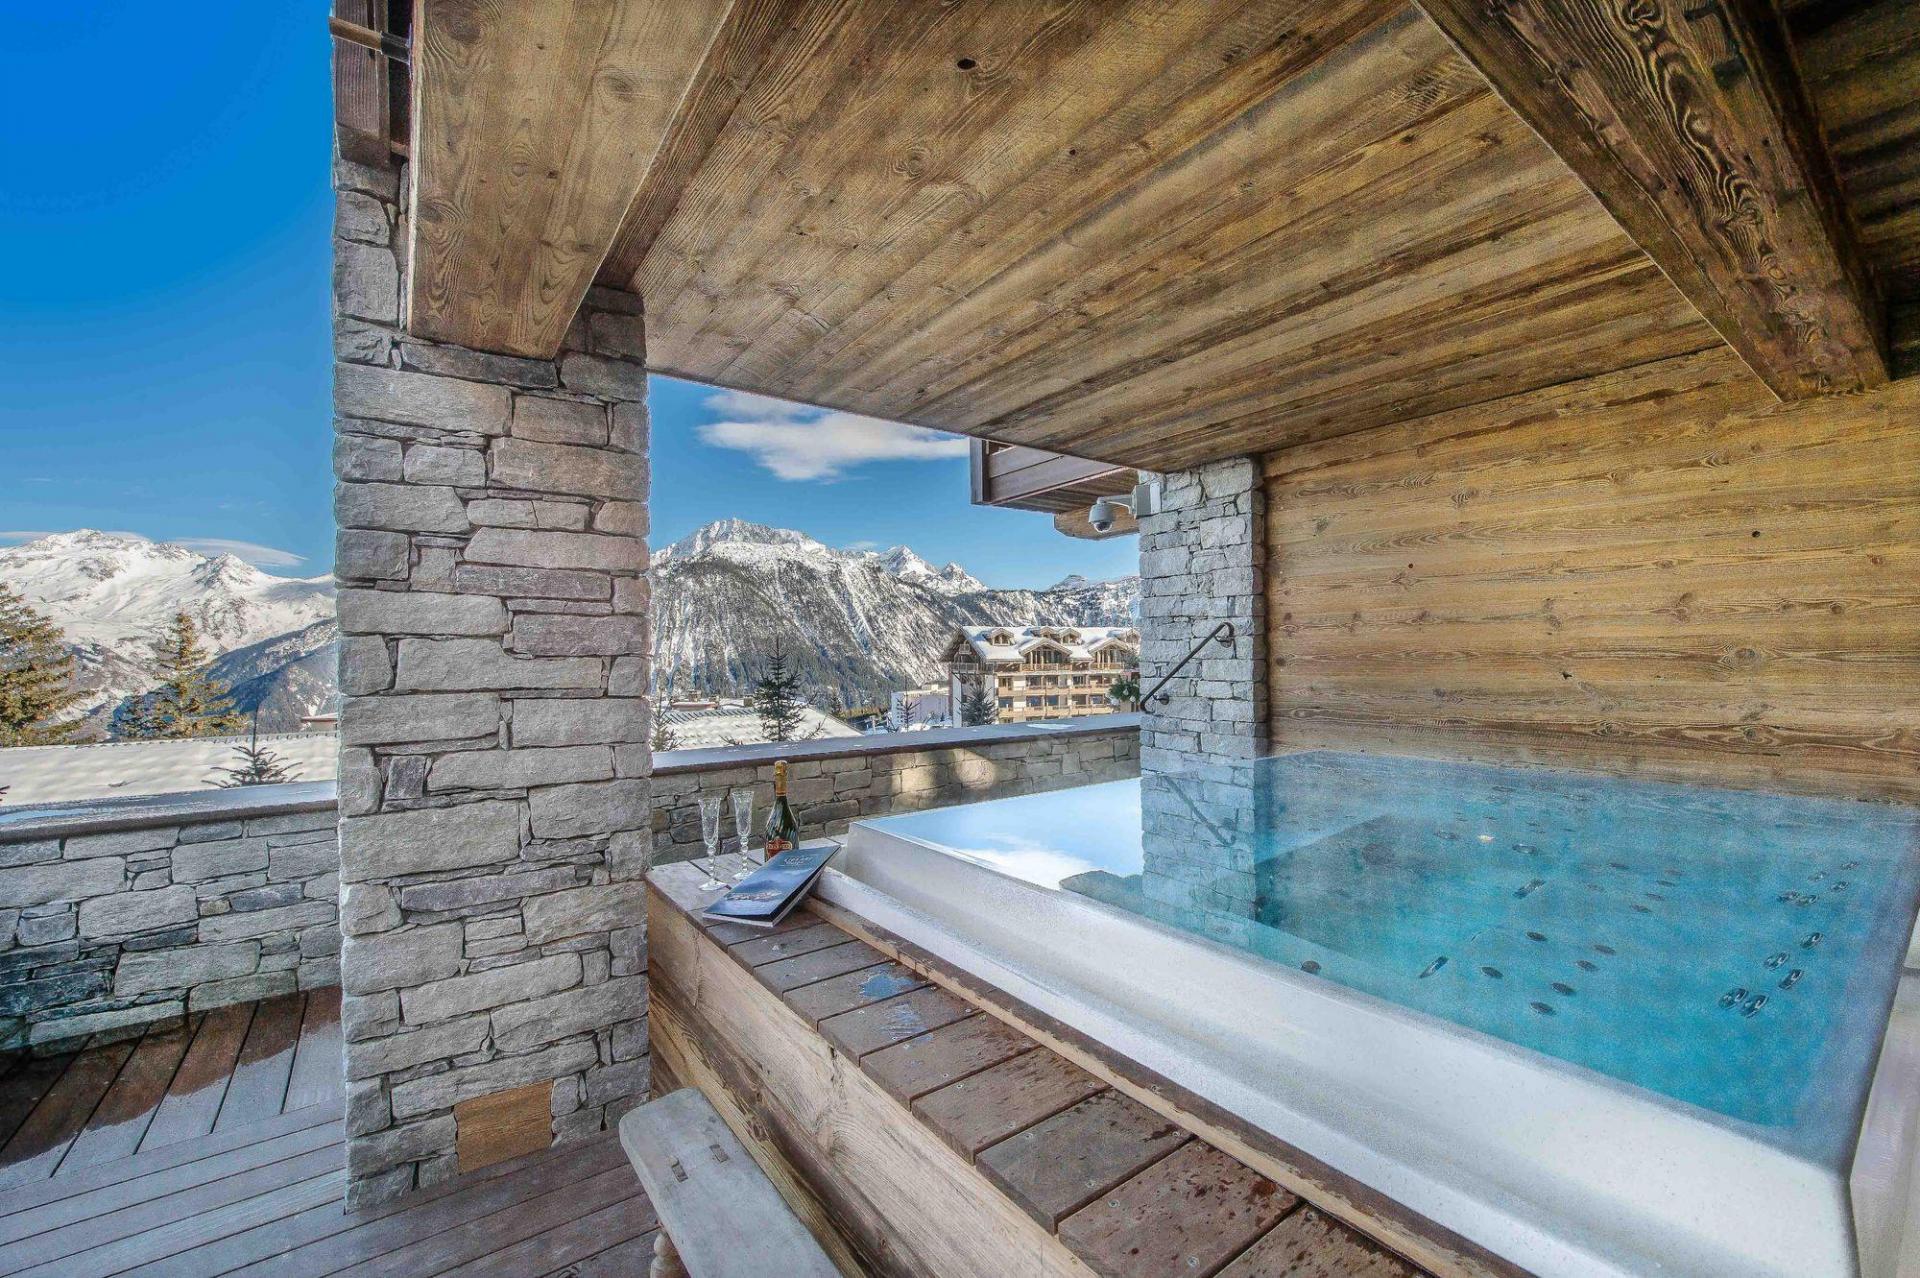 CHALET DES CHENUS LUXURY RENTAL AND ITS OUTSIDE JACUZZI